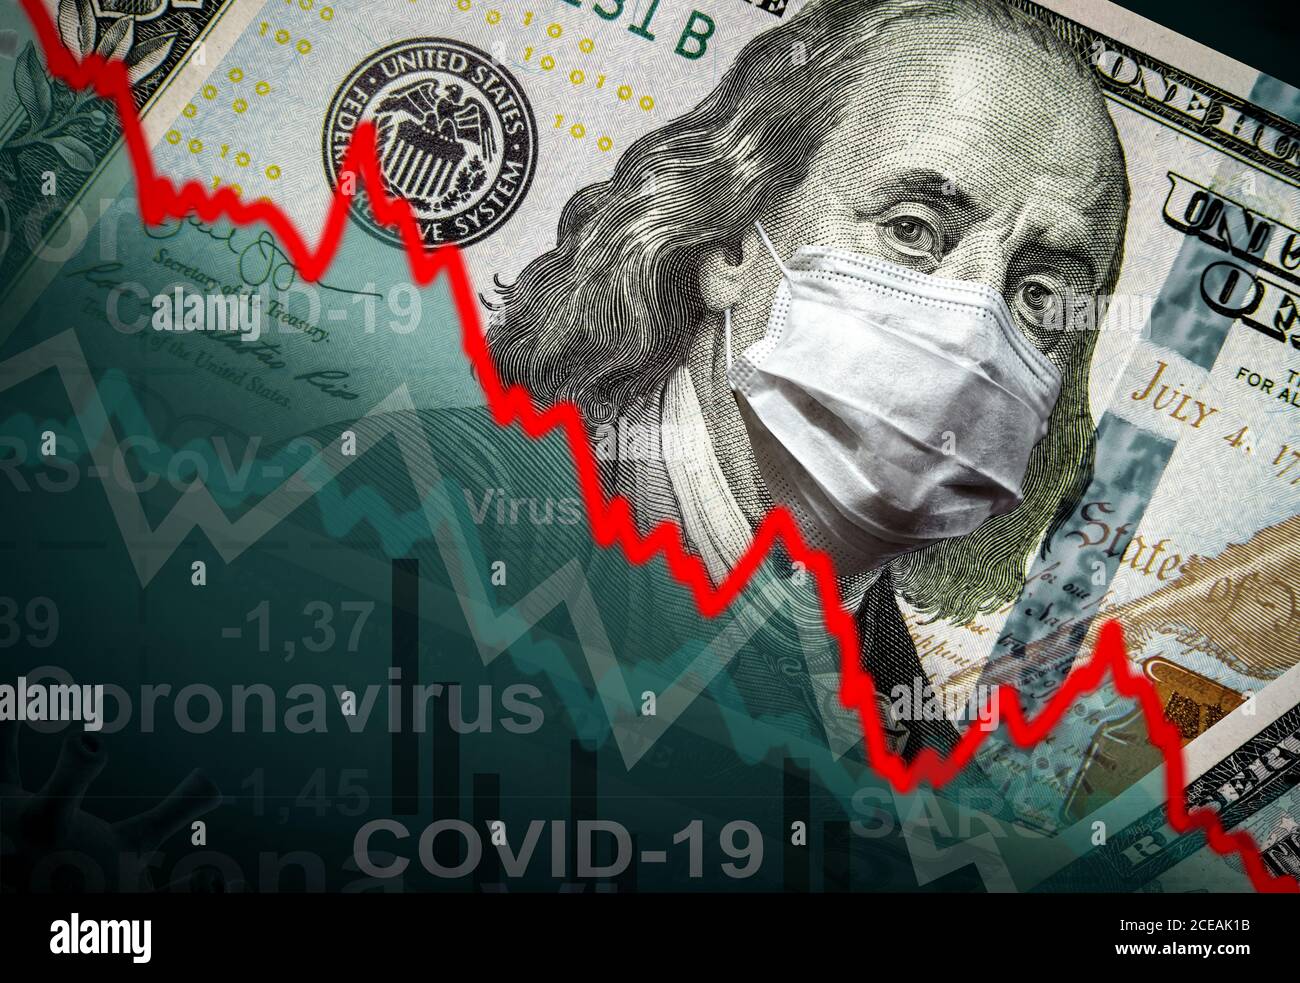 COVID-19 impacts to business: dollar money, mask and graph of stock market recession during coronavirus pandemic. Economy hits by corona virus. Global Stock Photo